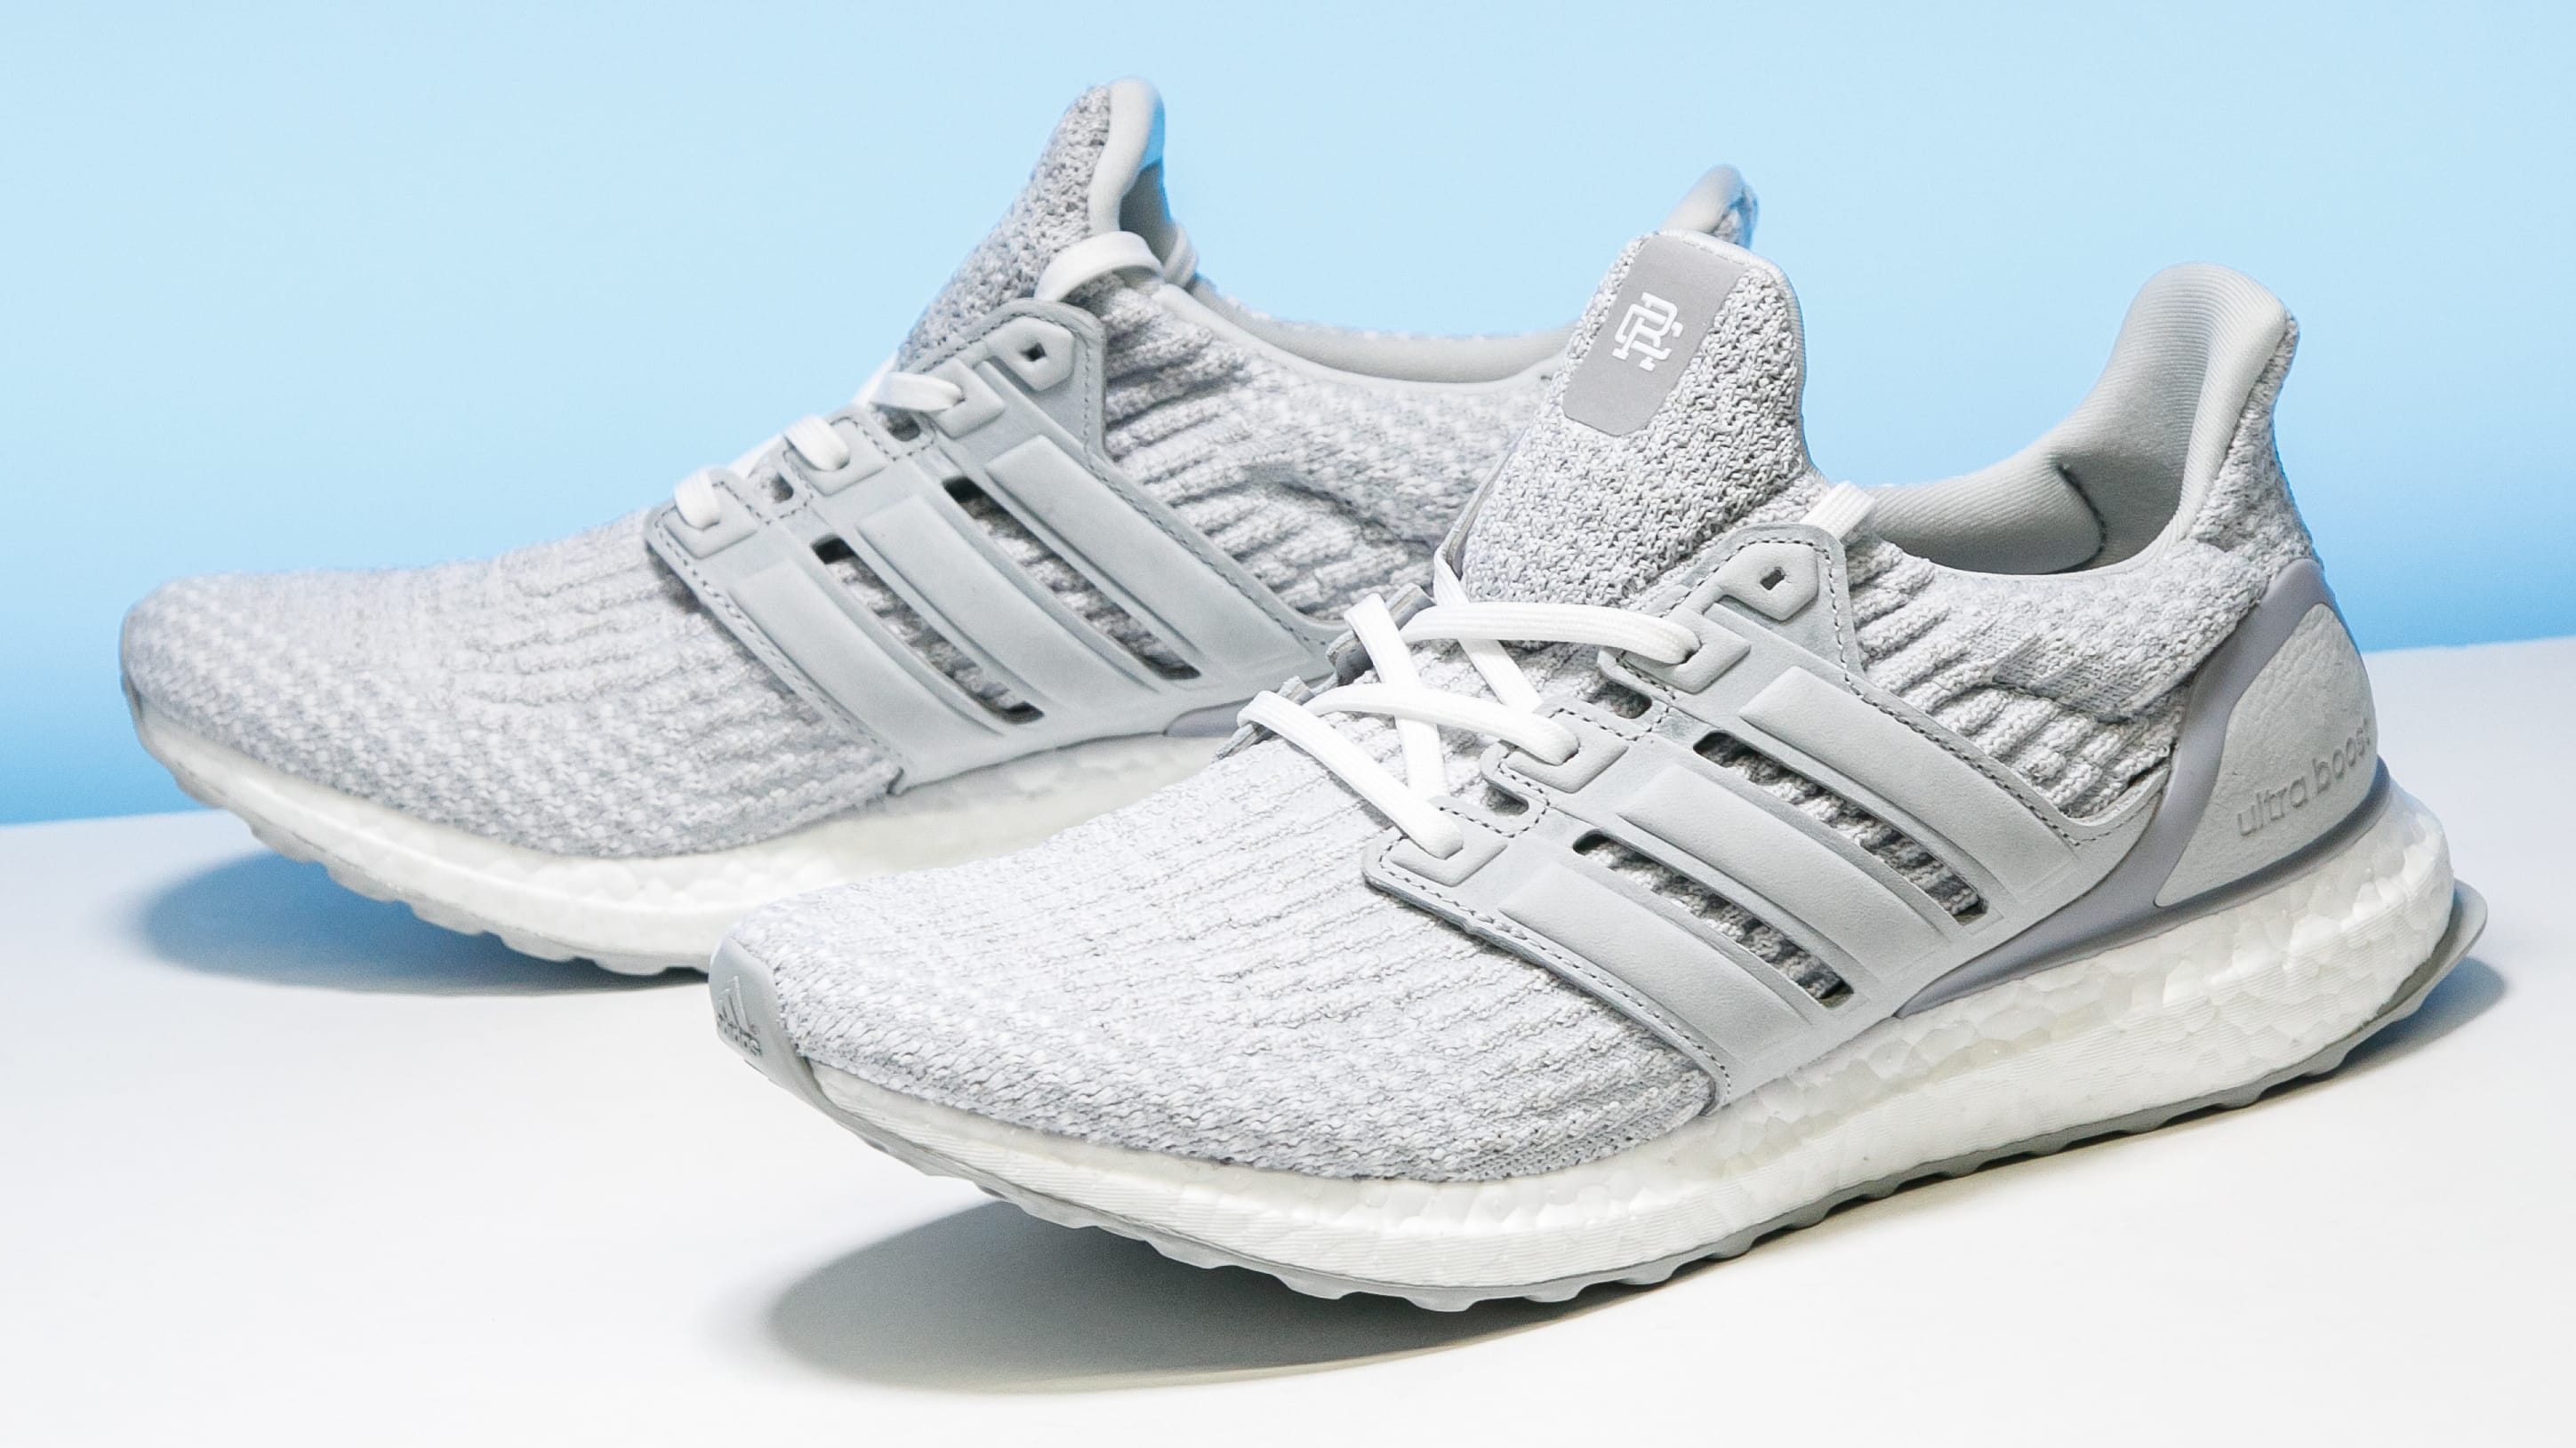 Reigning Champ x Adidas Ultra Boost 3.0